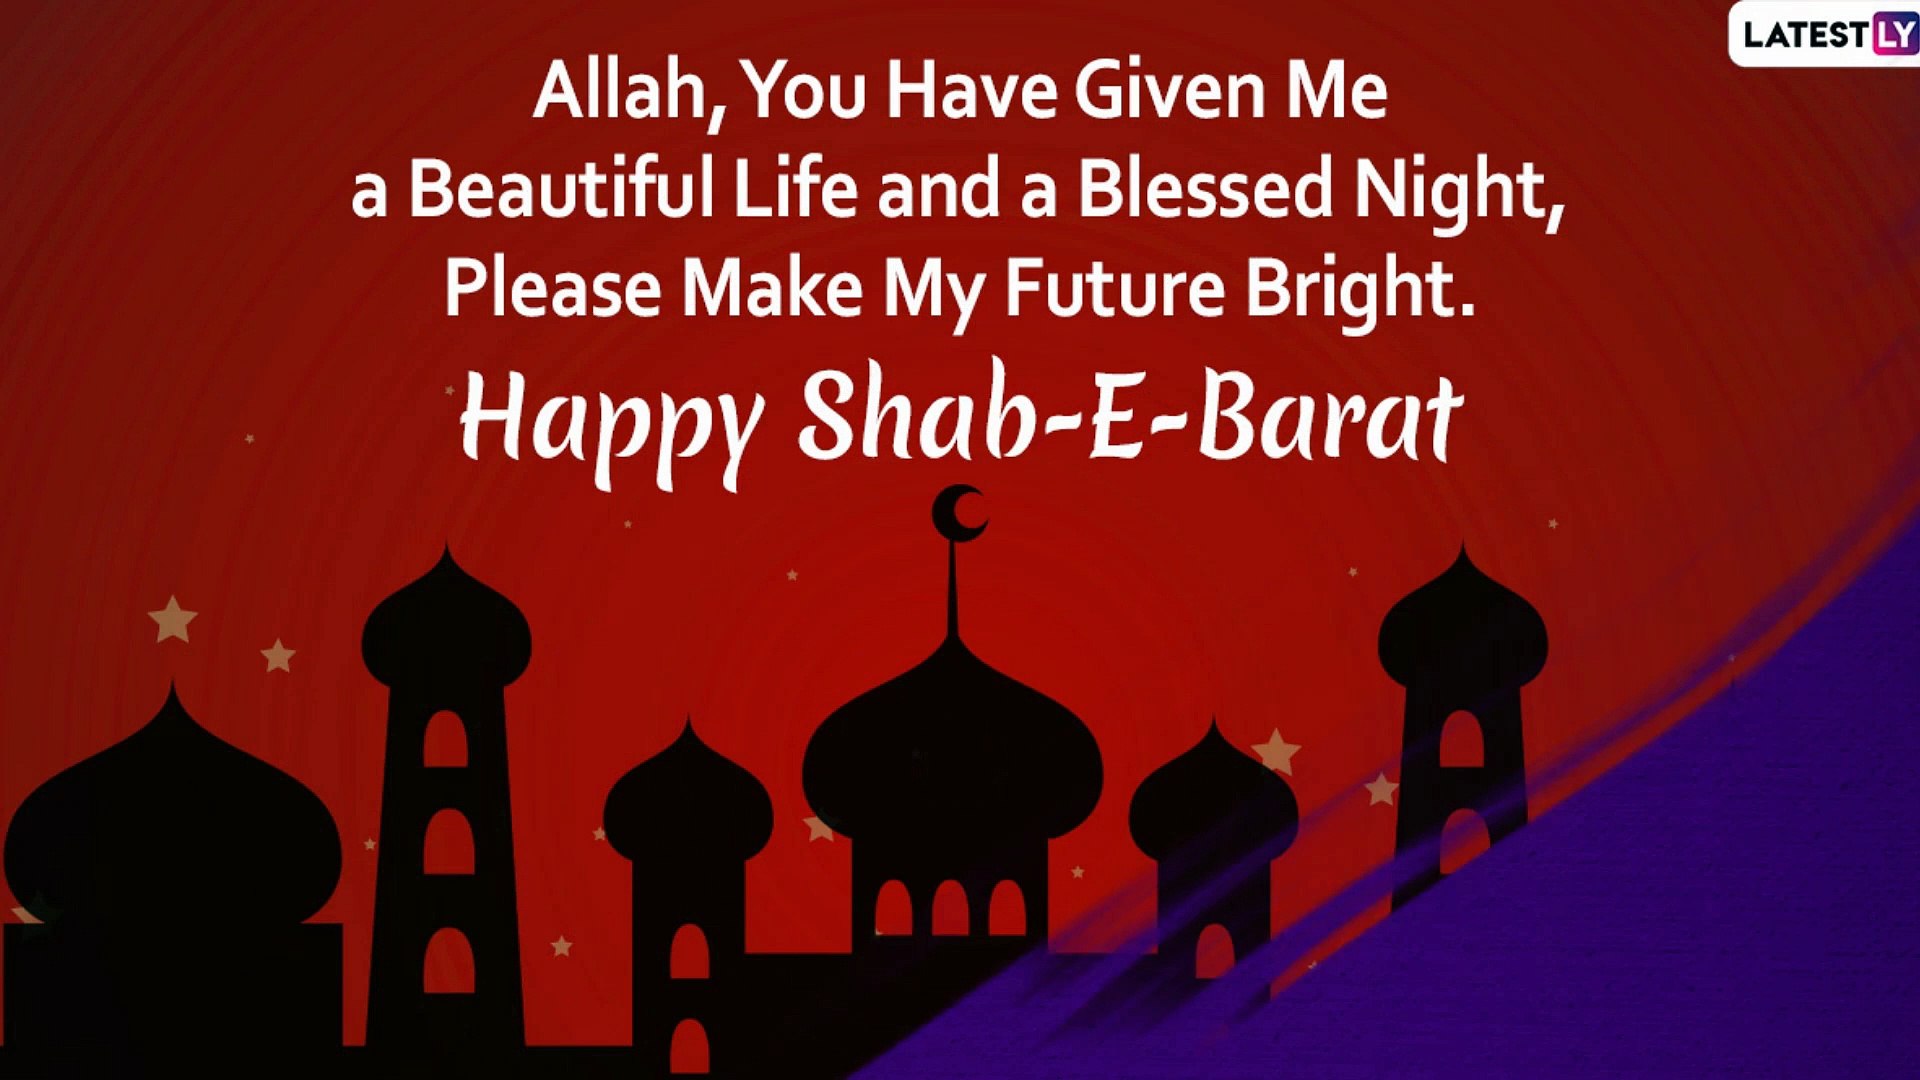 Shab-e-Barat Mubarak 2020 Wishes: Images, WhatsApp Messages & Greetings To  Send On Mid-Shaban - video Dailymotion